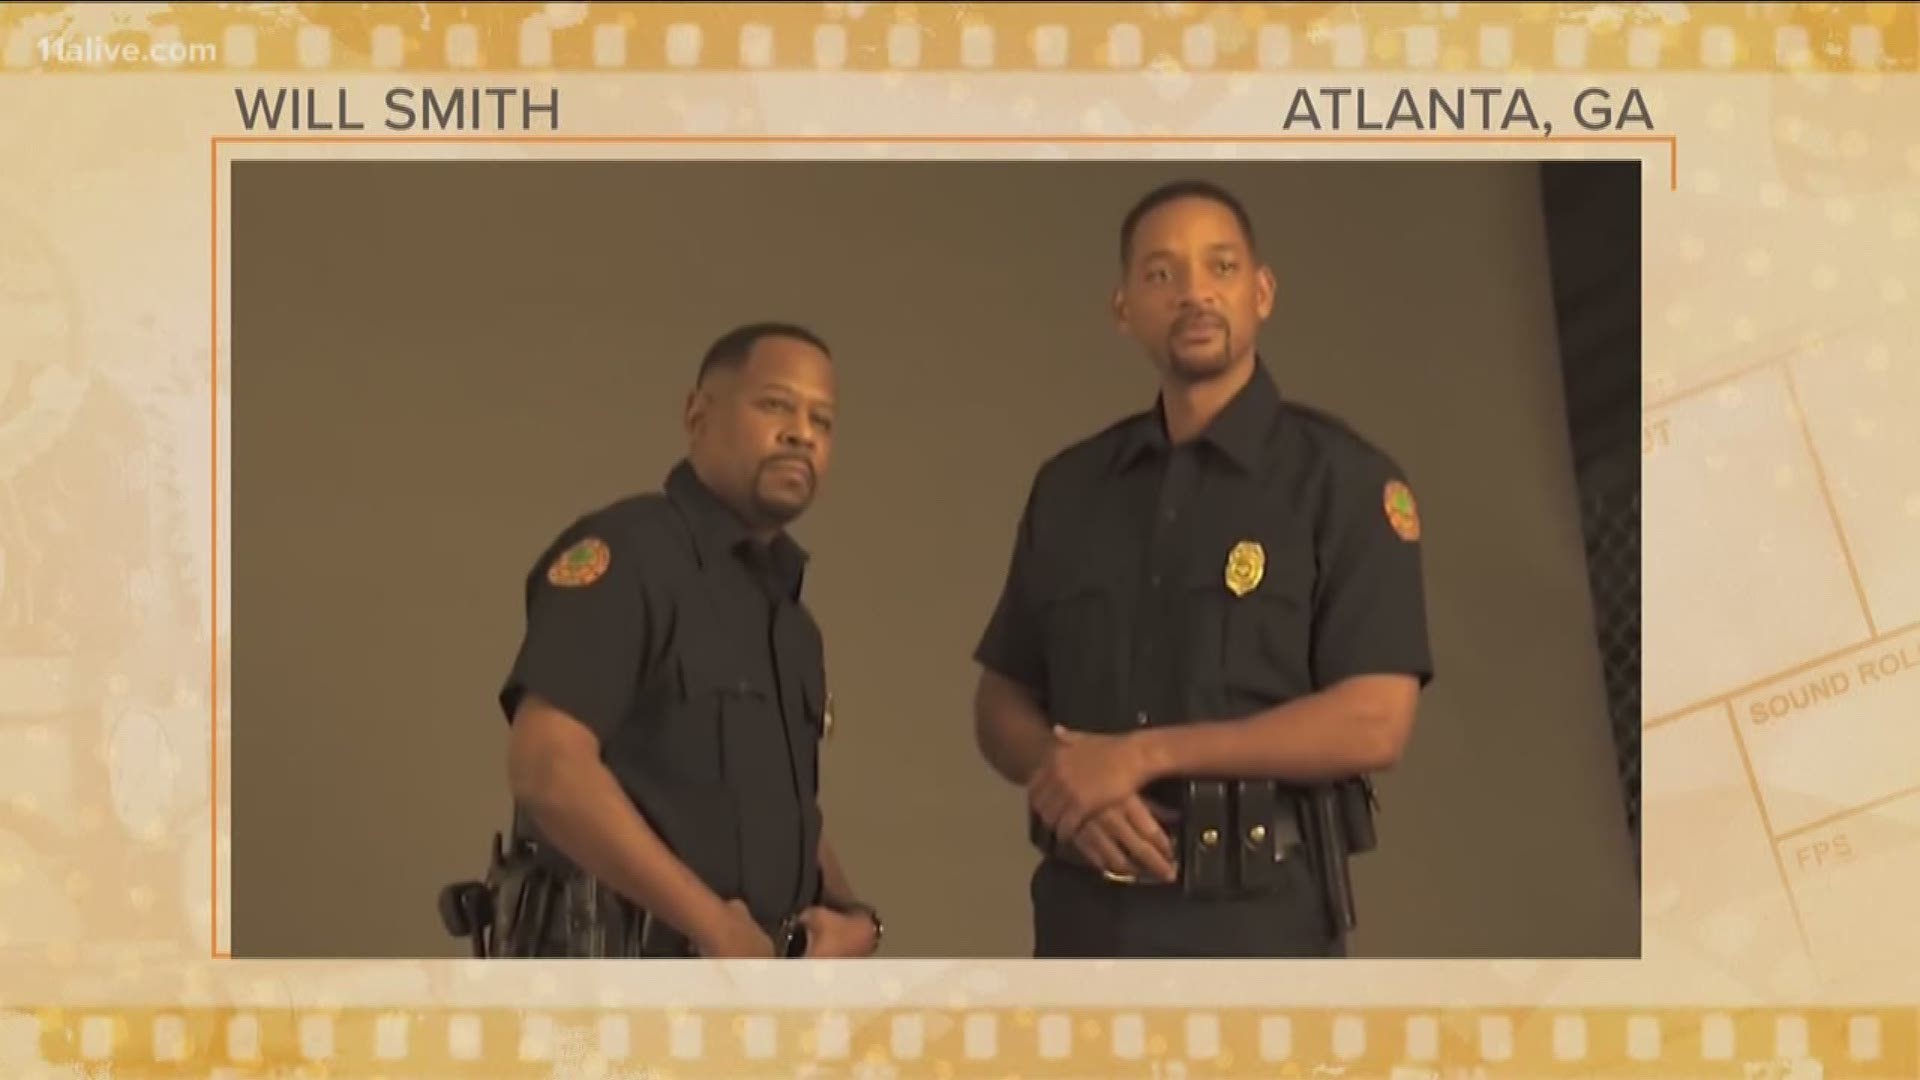 Will Smith's video has over four million viewers.